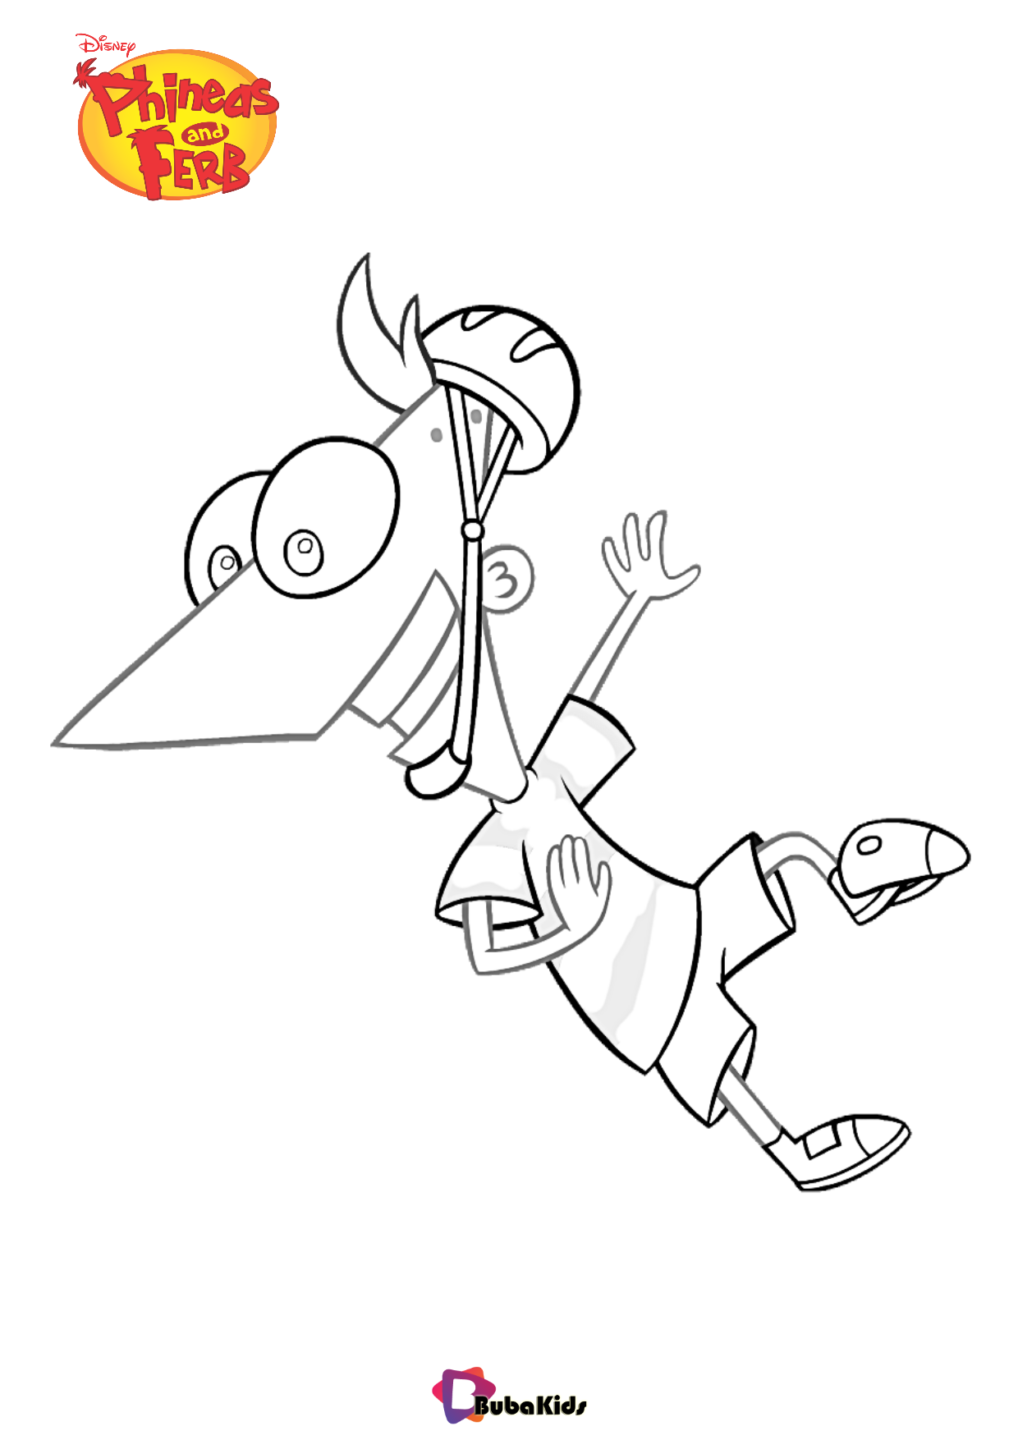 Phineas tv serial Phineas and ferb disney coloring page